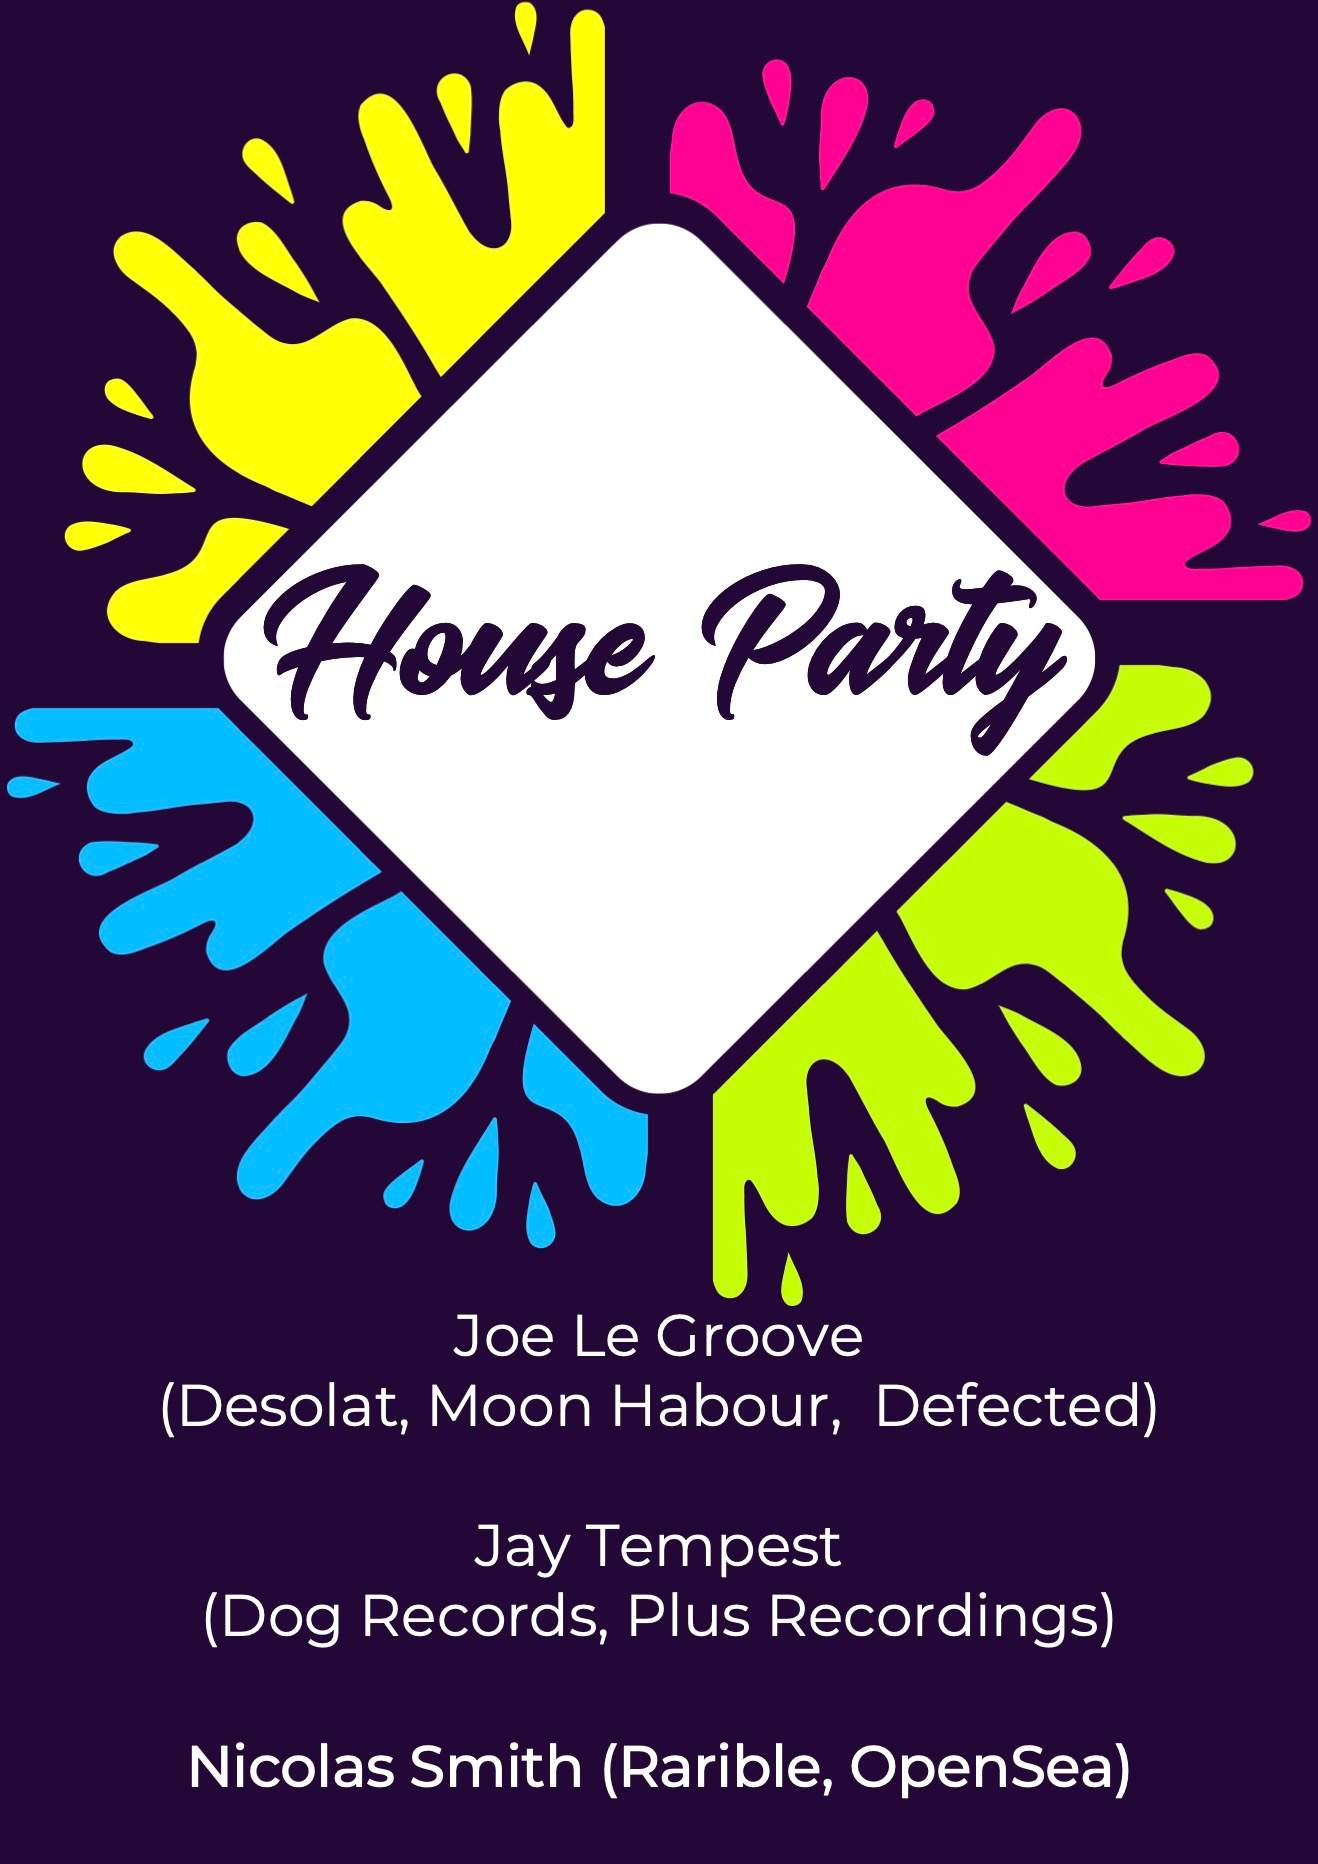 House Party - フライヤー表